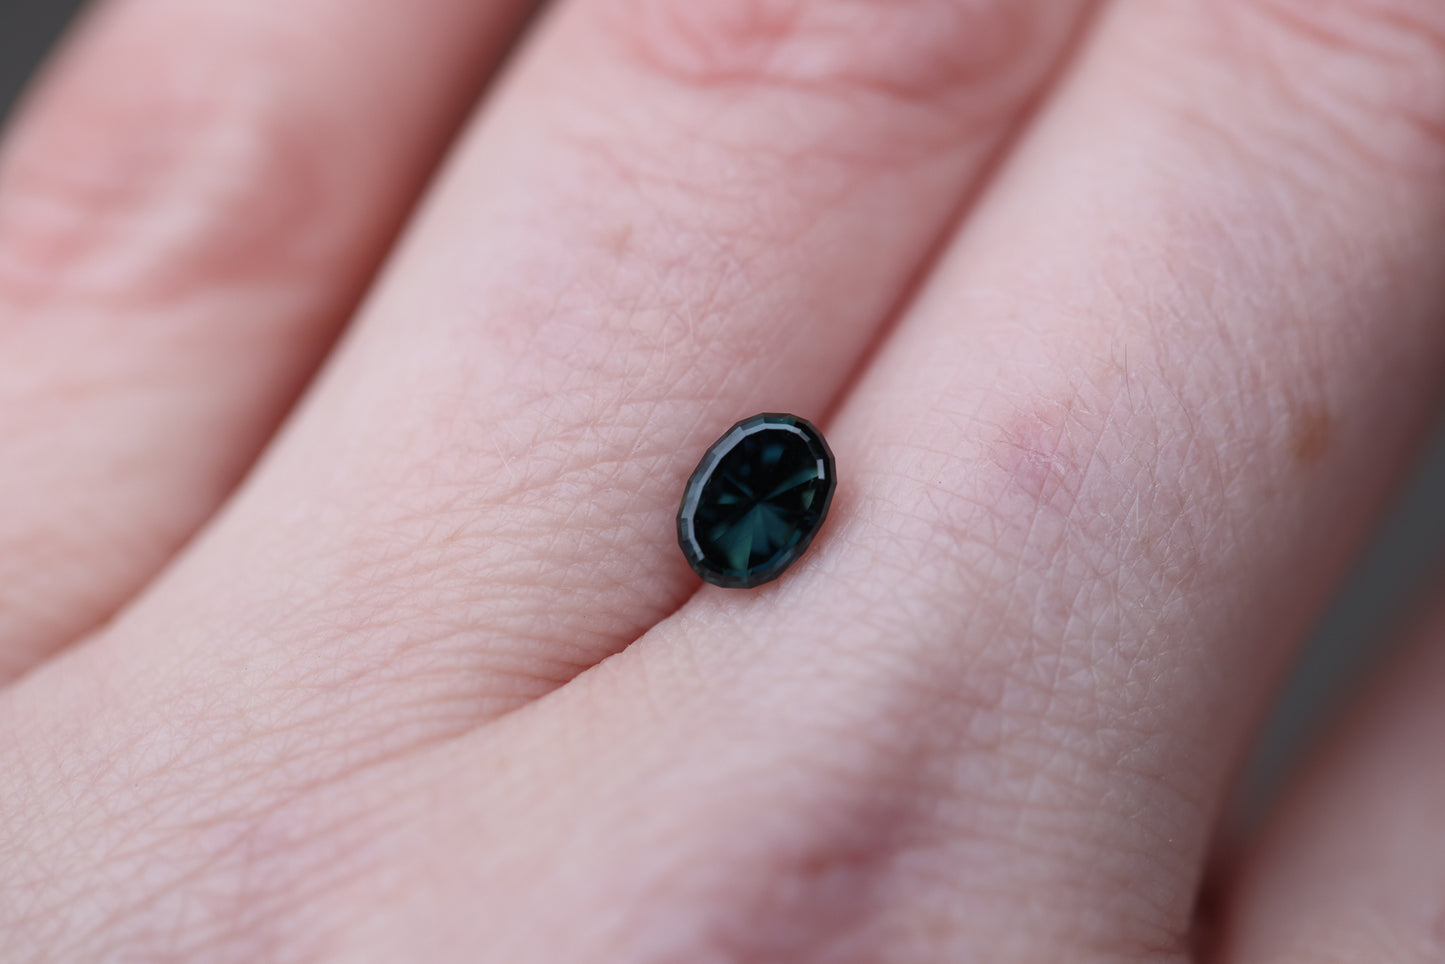 Load image into Gallery viewer, 1.15ct oval deep dark green teal sapphire - Regal Radiant by John Dyer
